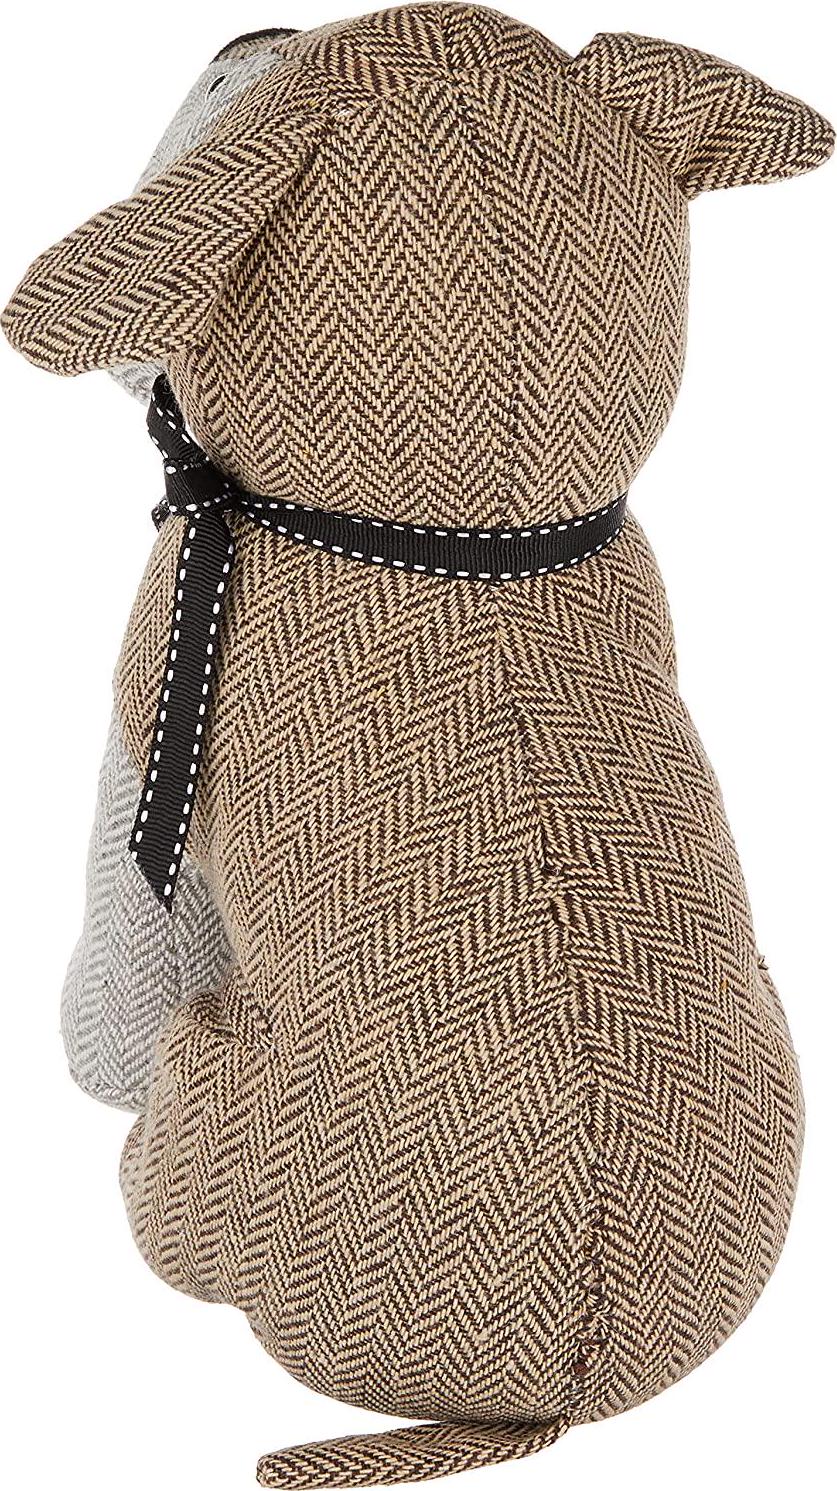 ELEMENTS, Elements Cute Door Stopper for Home and Office - Tweed Brown Dog Weighted Fabric Animal Door Stopper, 10-Inch, Multicolor